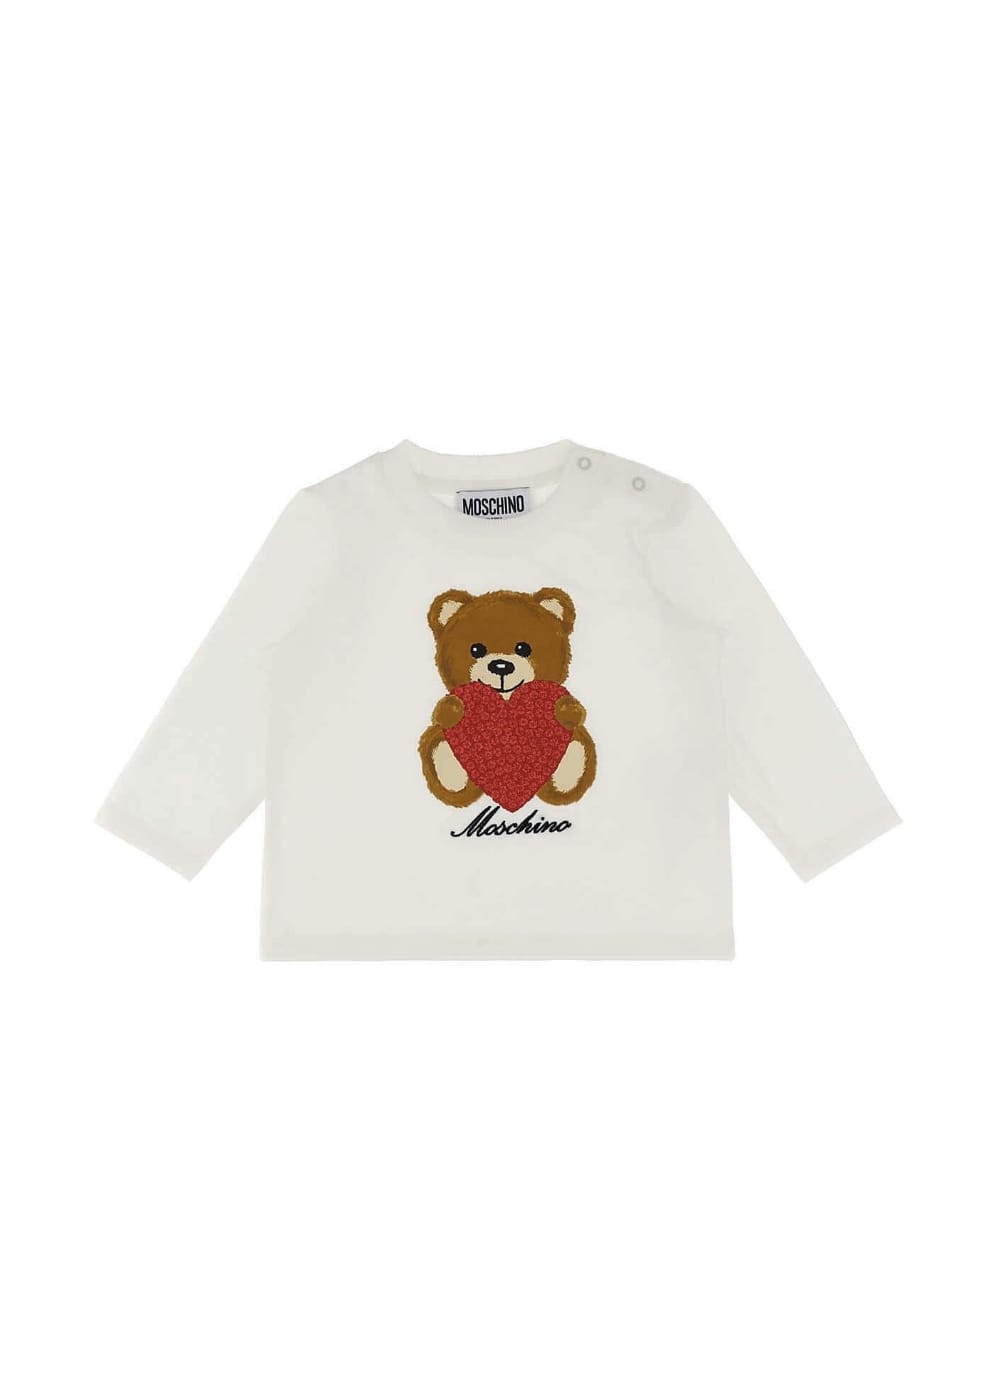 Featured image for “Moschino T-shirt Teddy Bear Cuore”